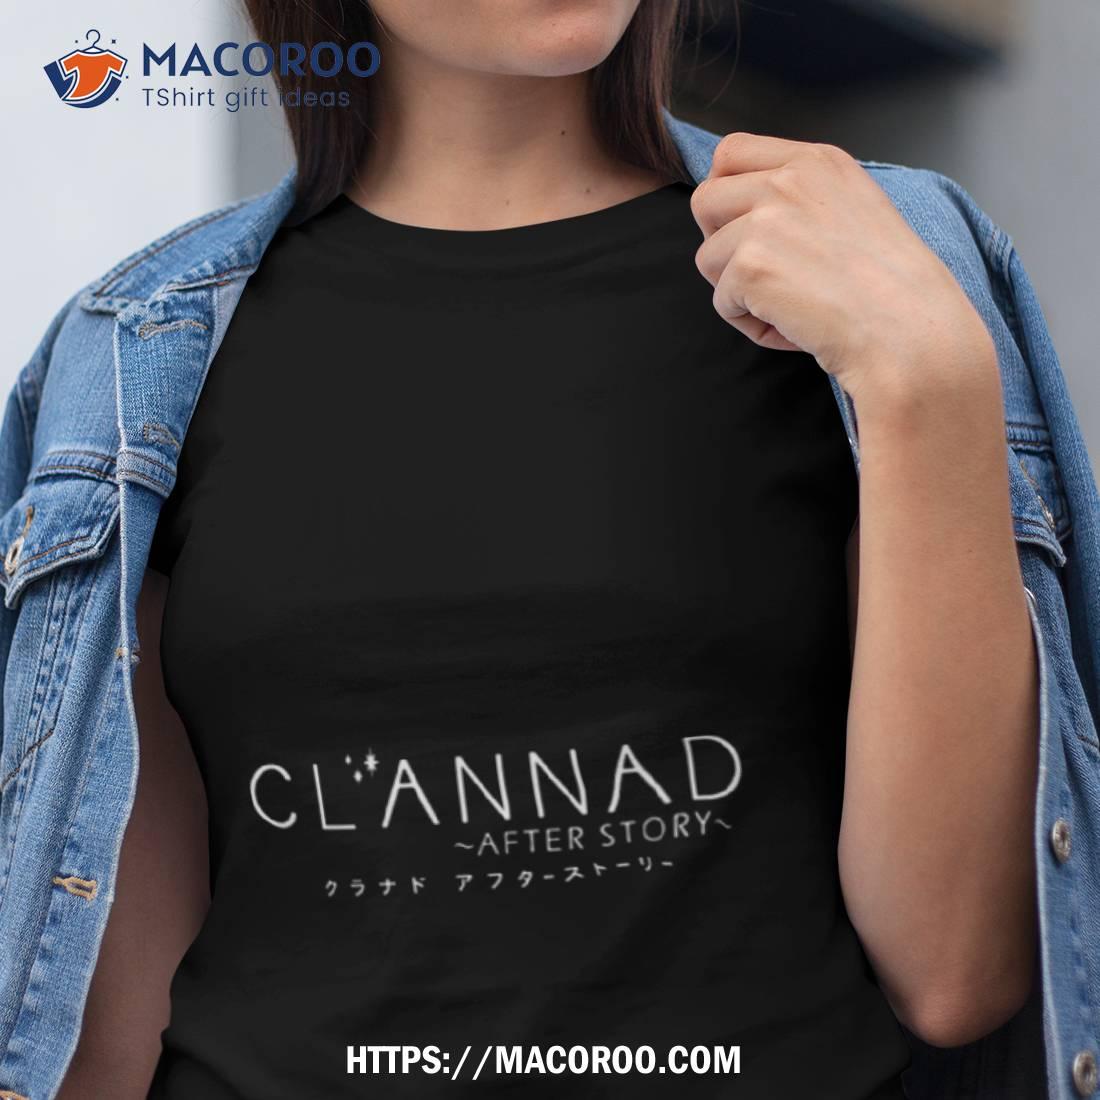 Clannad After Story White Logo Shirt Tshirt